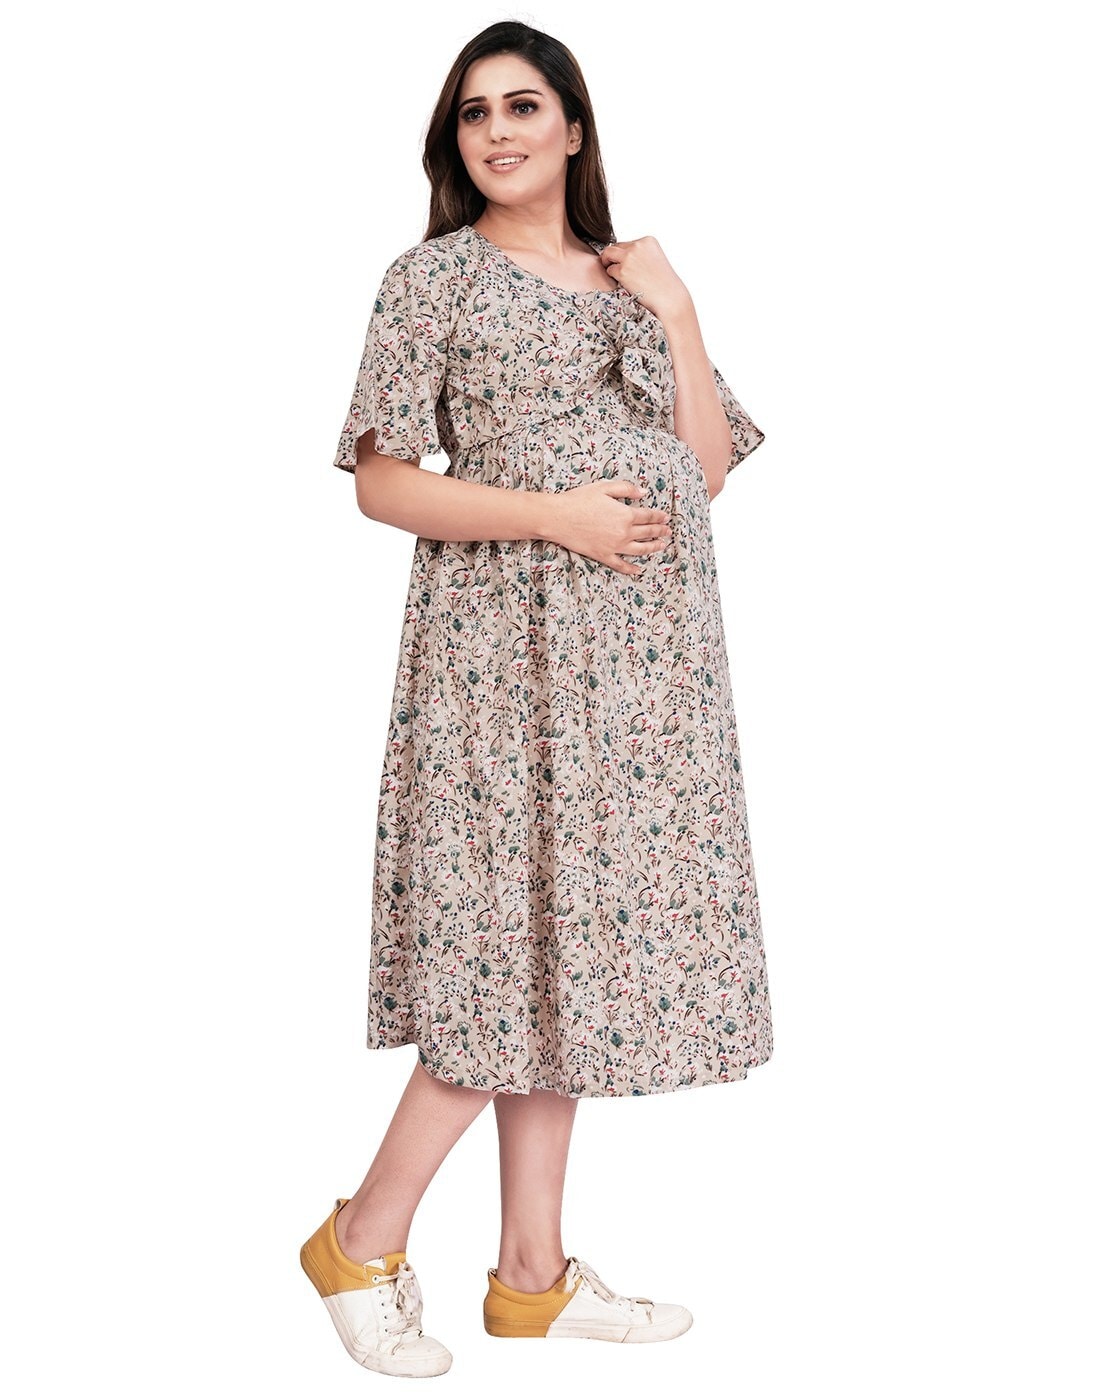 Women's Floral Short Sleeve Loose Maternity Dresses Pregnancy Clothes  Summer Casual Soft Waist Pleated Print Knee Length Dress